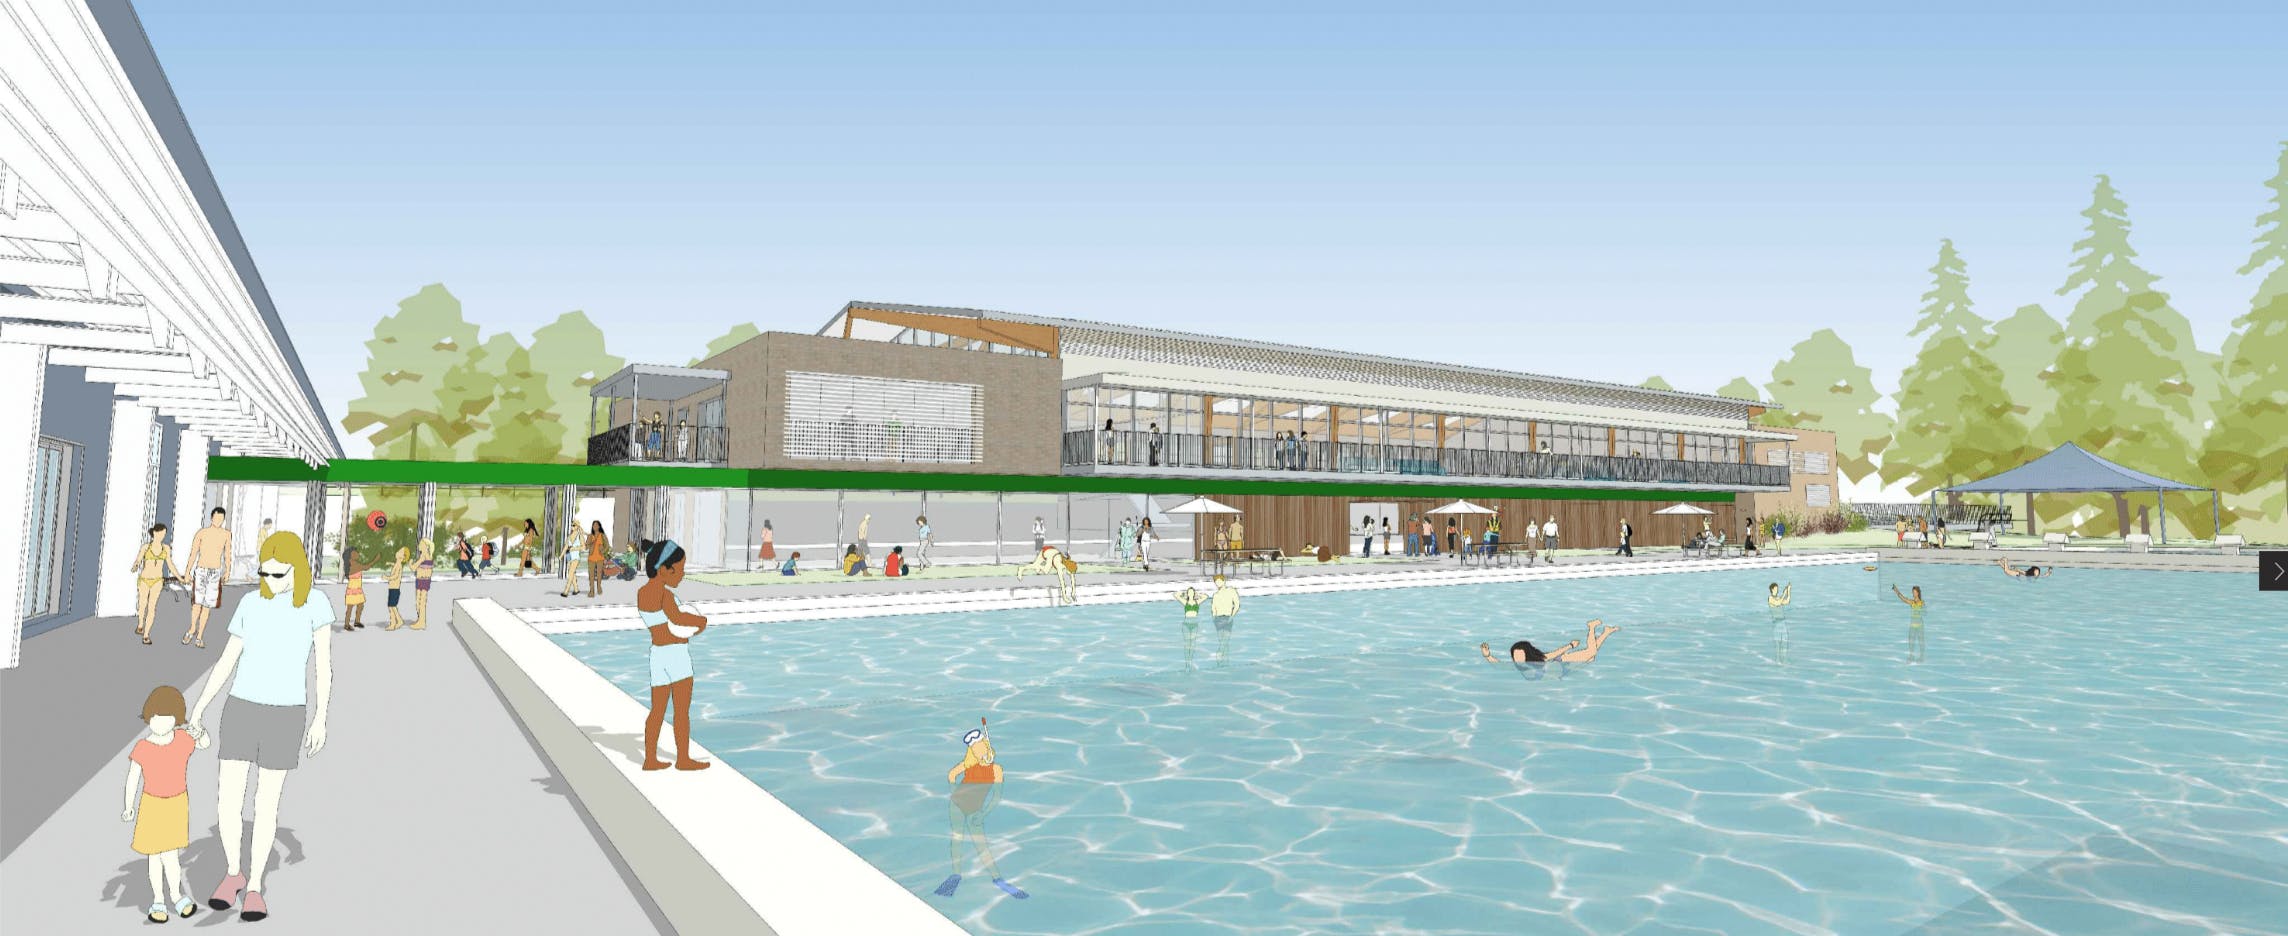 View across 50 metre pool to proposed new building  (Concept design) 